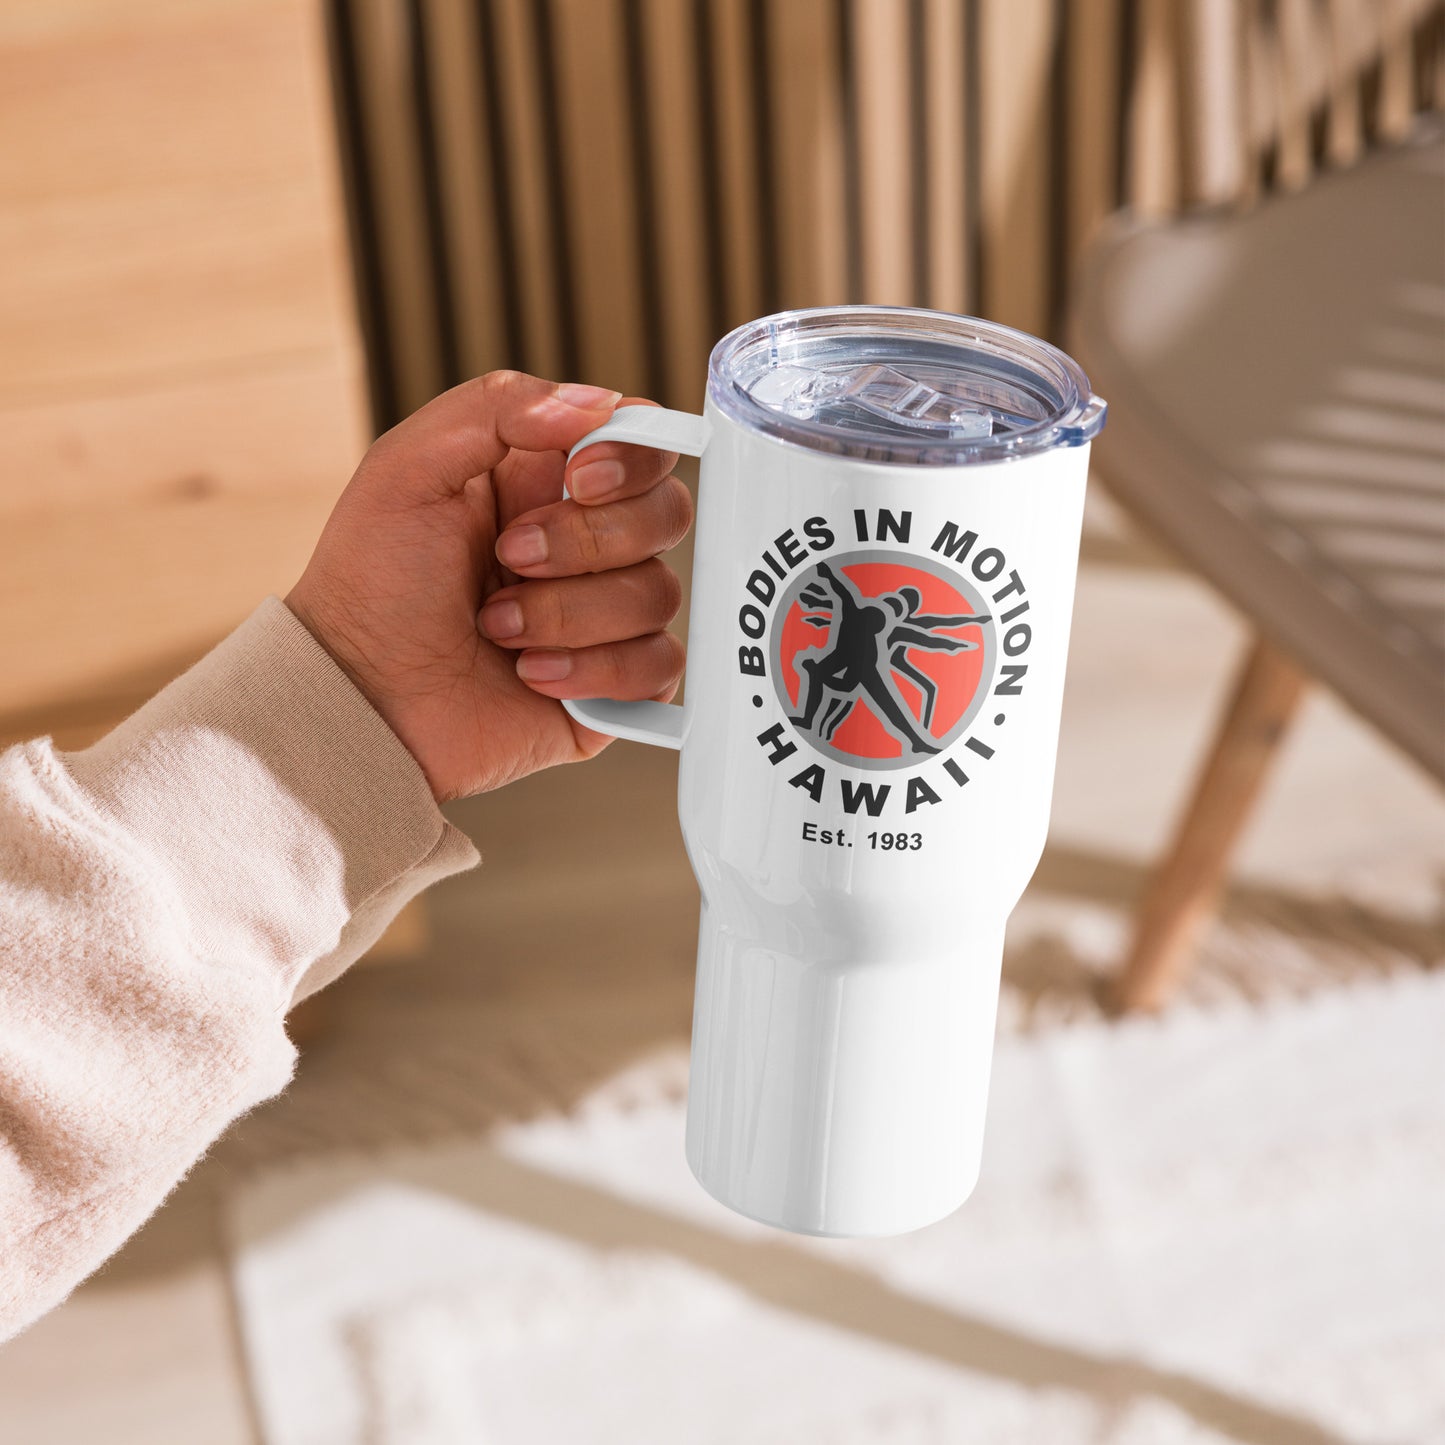 Bodies in Motion Travel mug with a handle